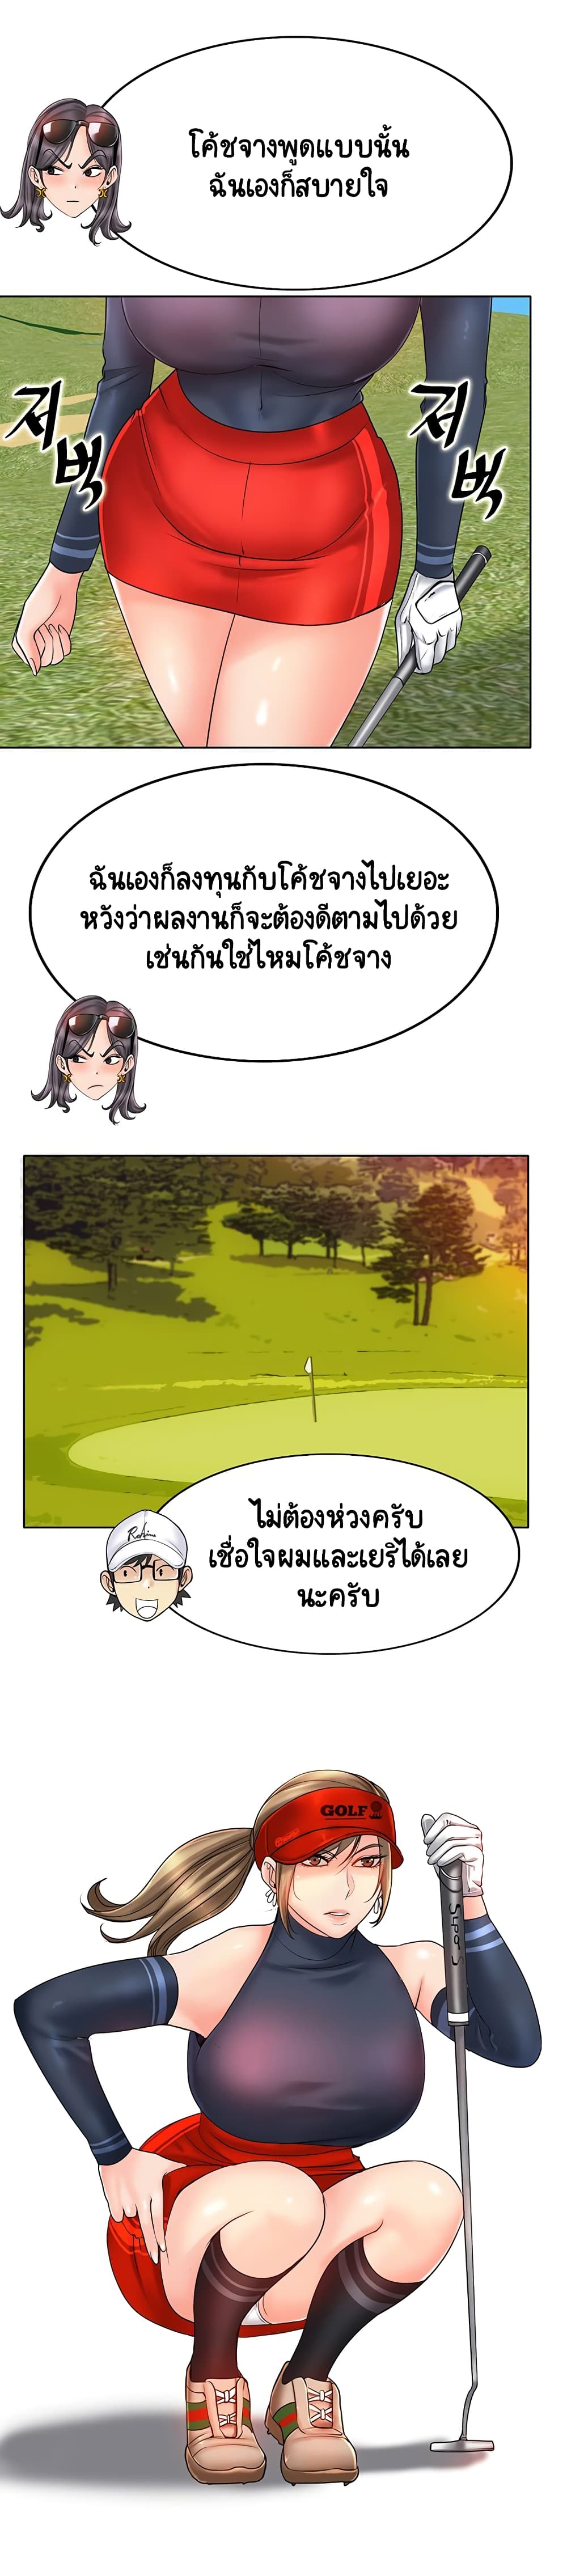 Hole In One 21 (5)